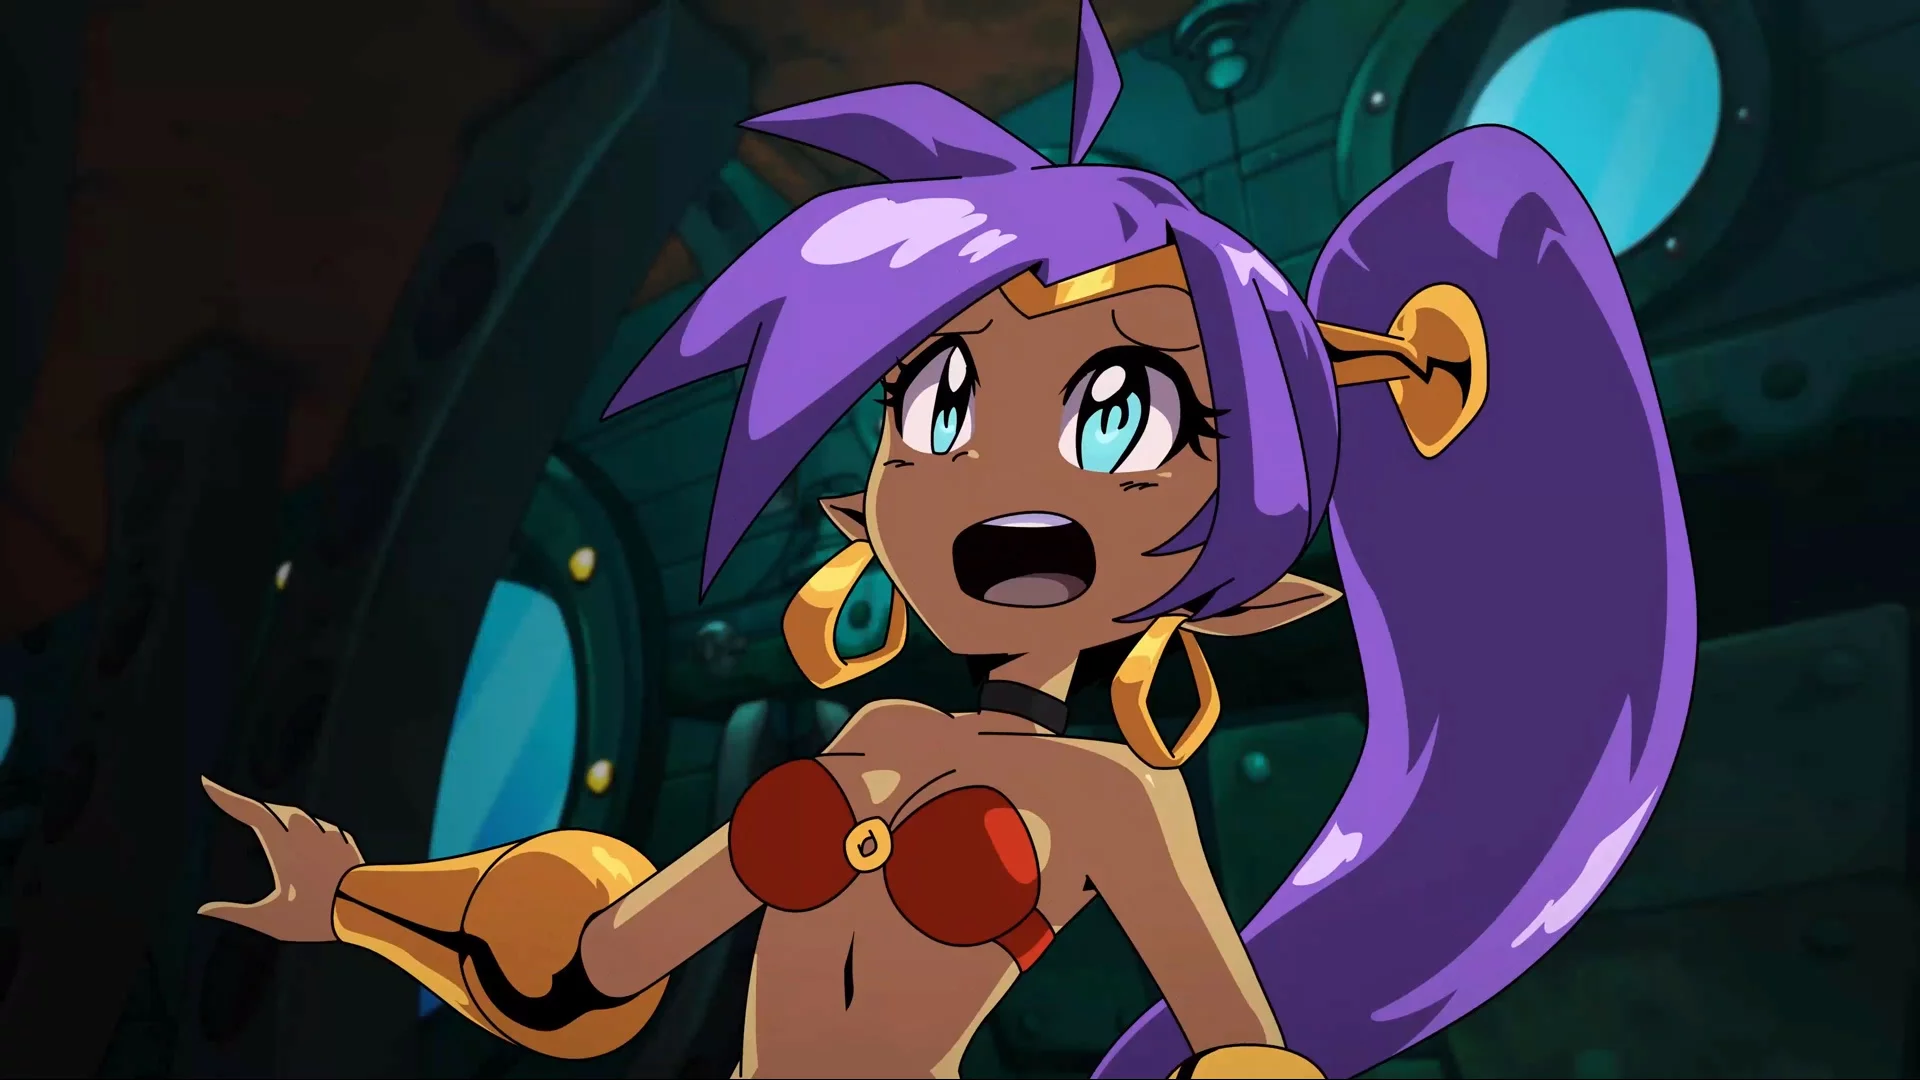 Platformer 'Shantae and the Seven Sirens' hits Xbox One and PC soon